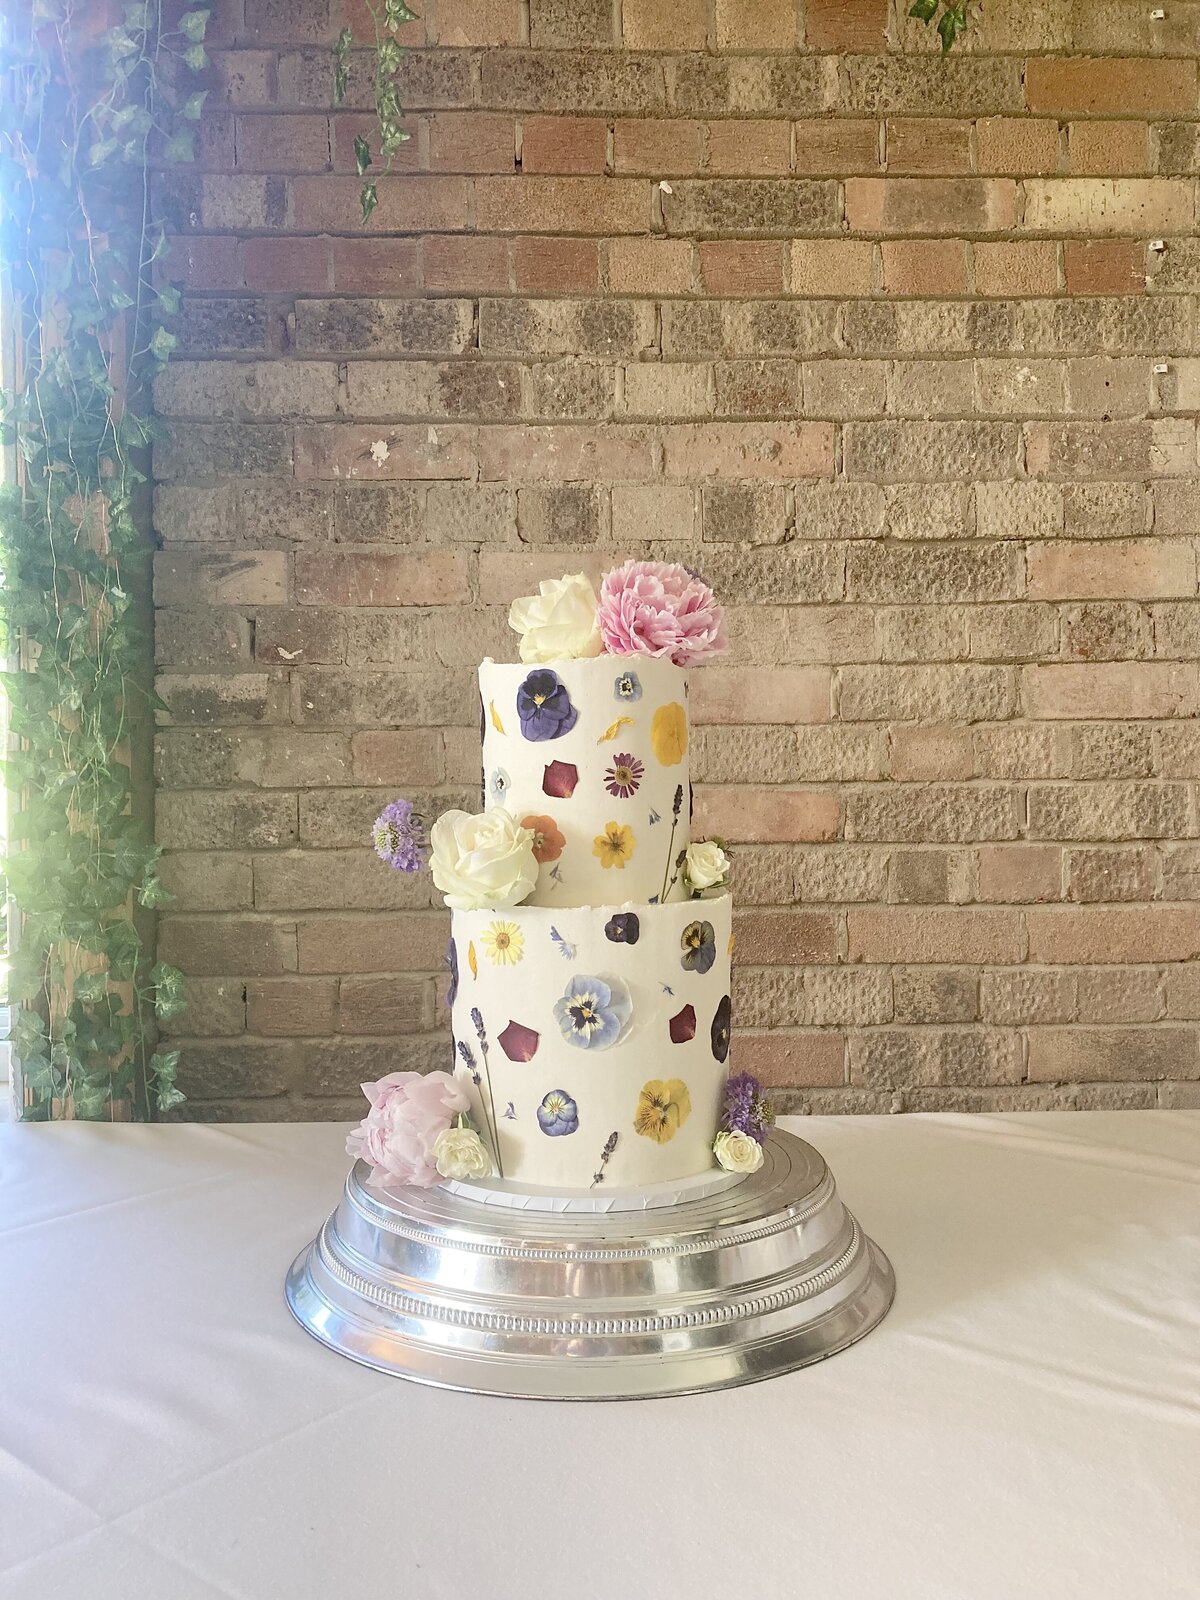 Mix of edible and fresh flower wedding cake